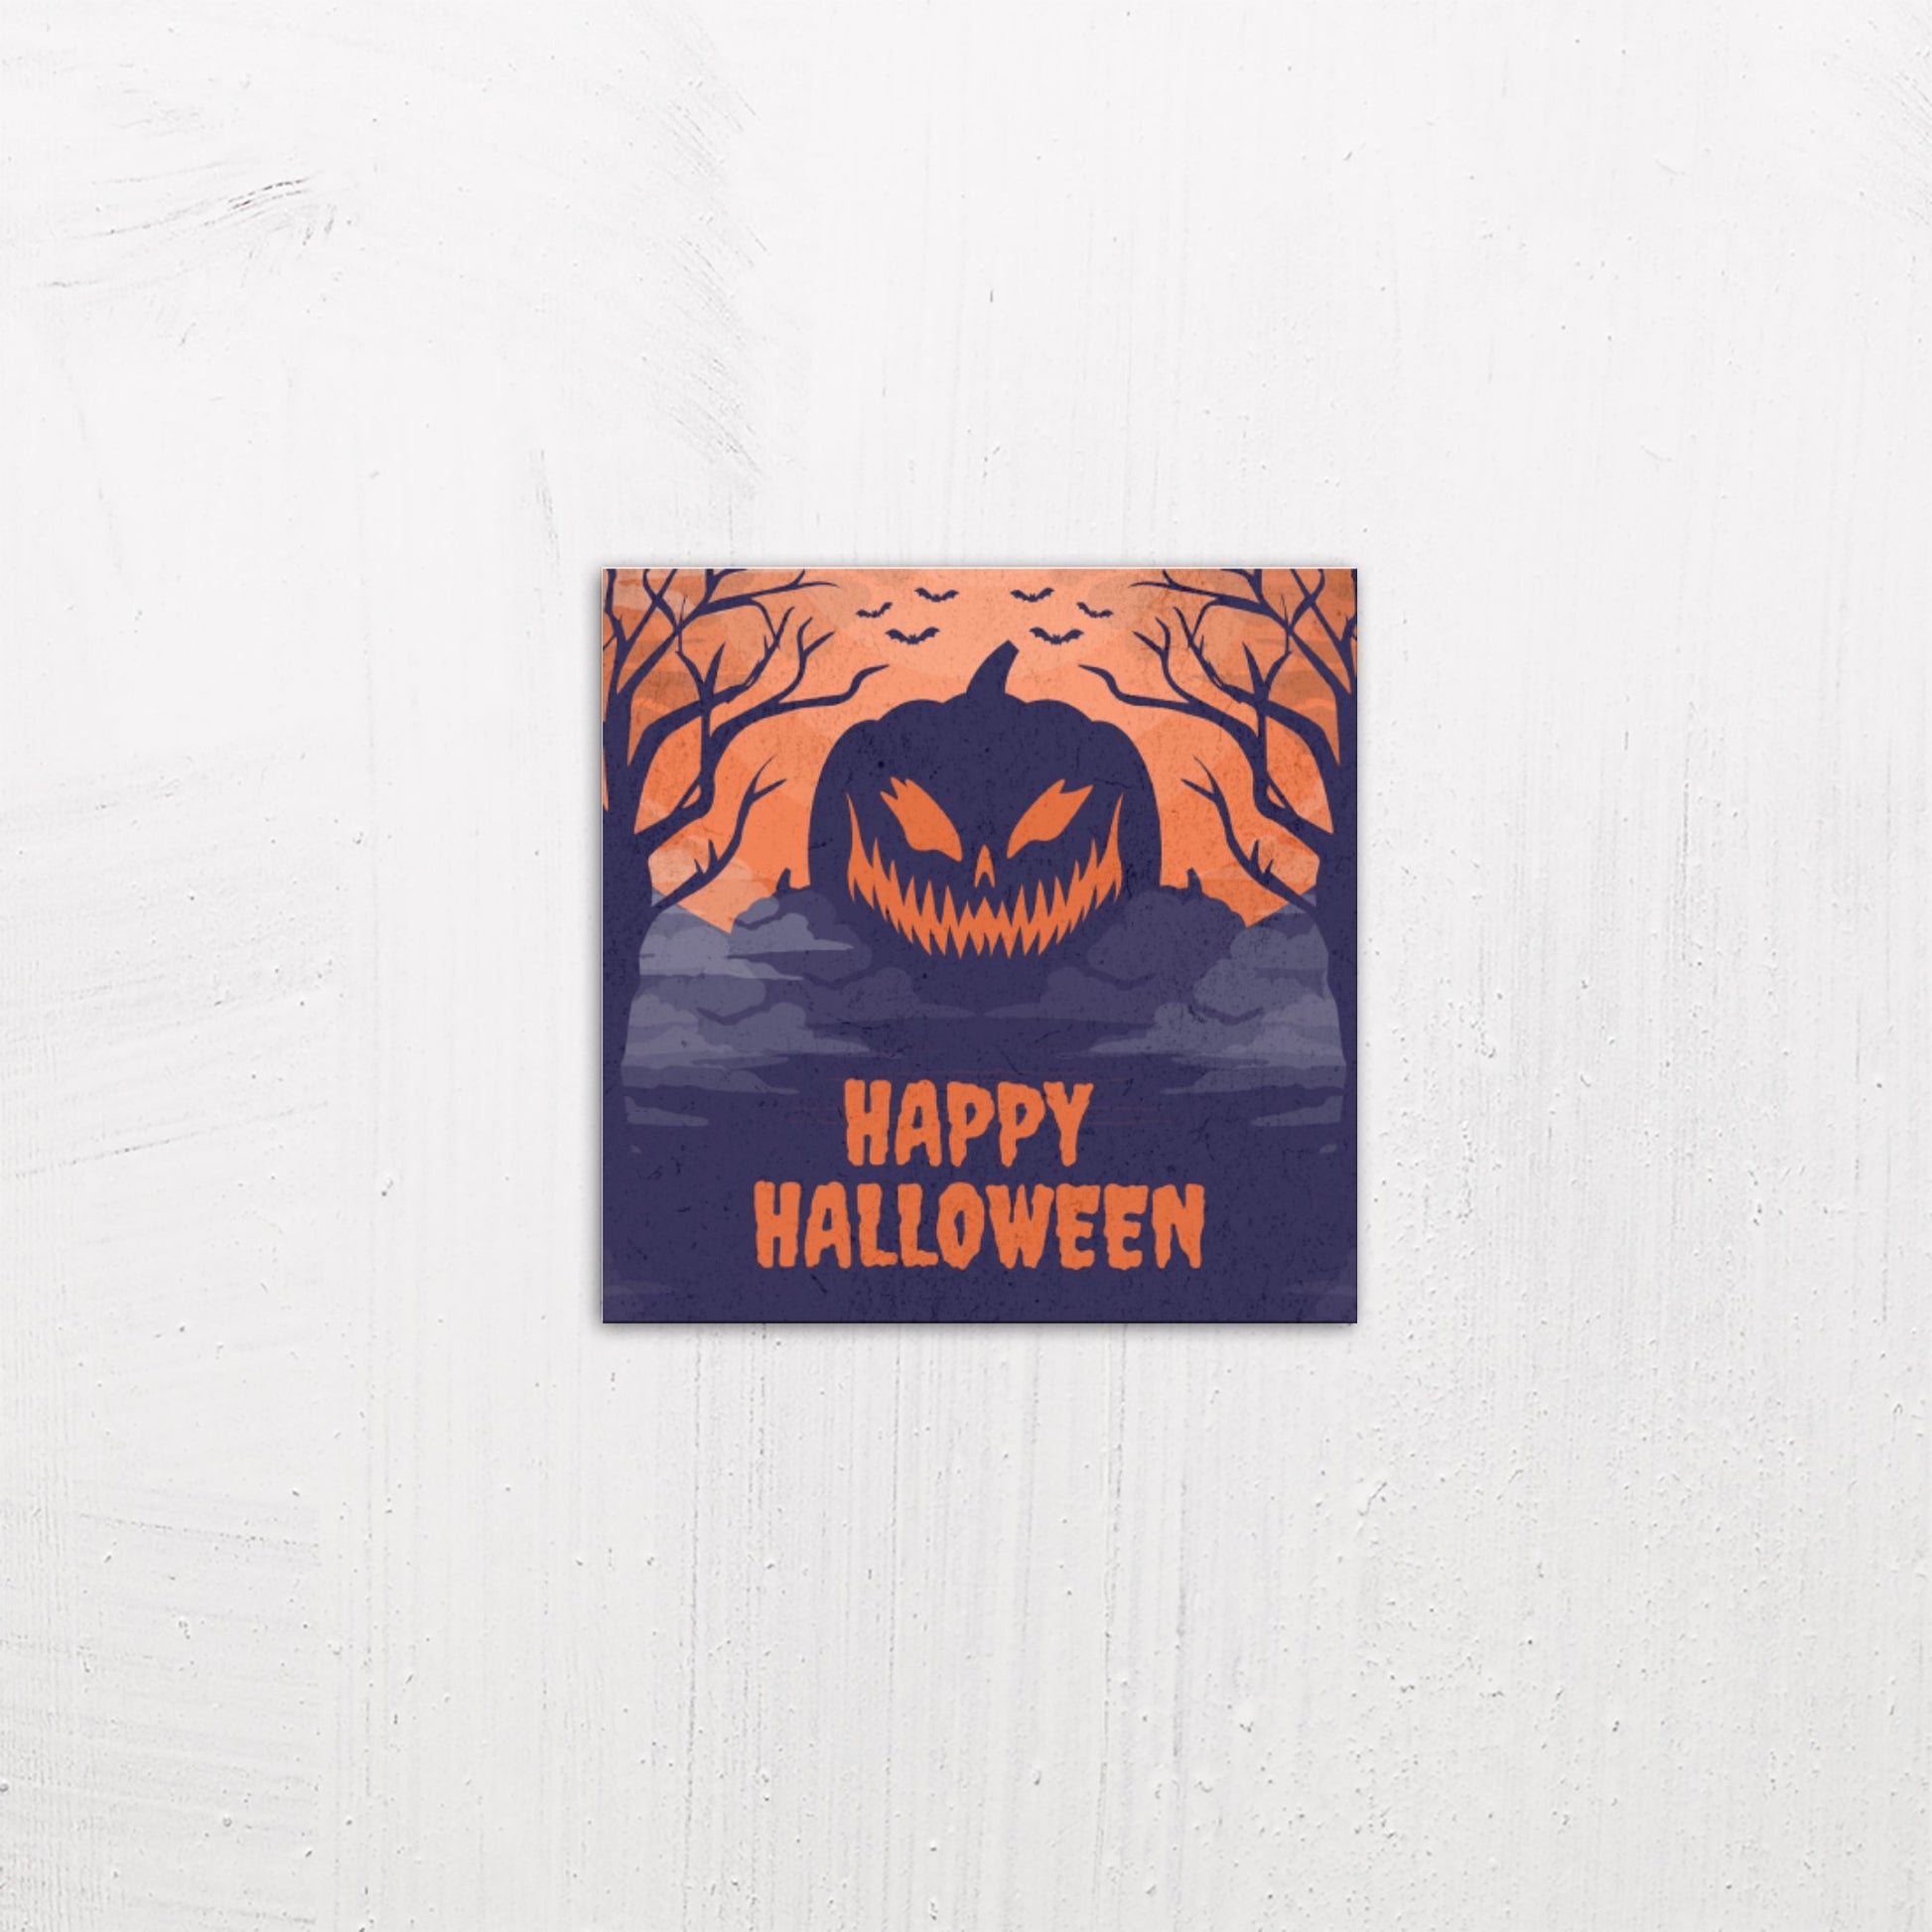 A small size metal art poster display plate with printed design of a Happy Halloween Scary Pumpkin